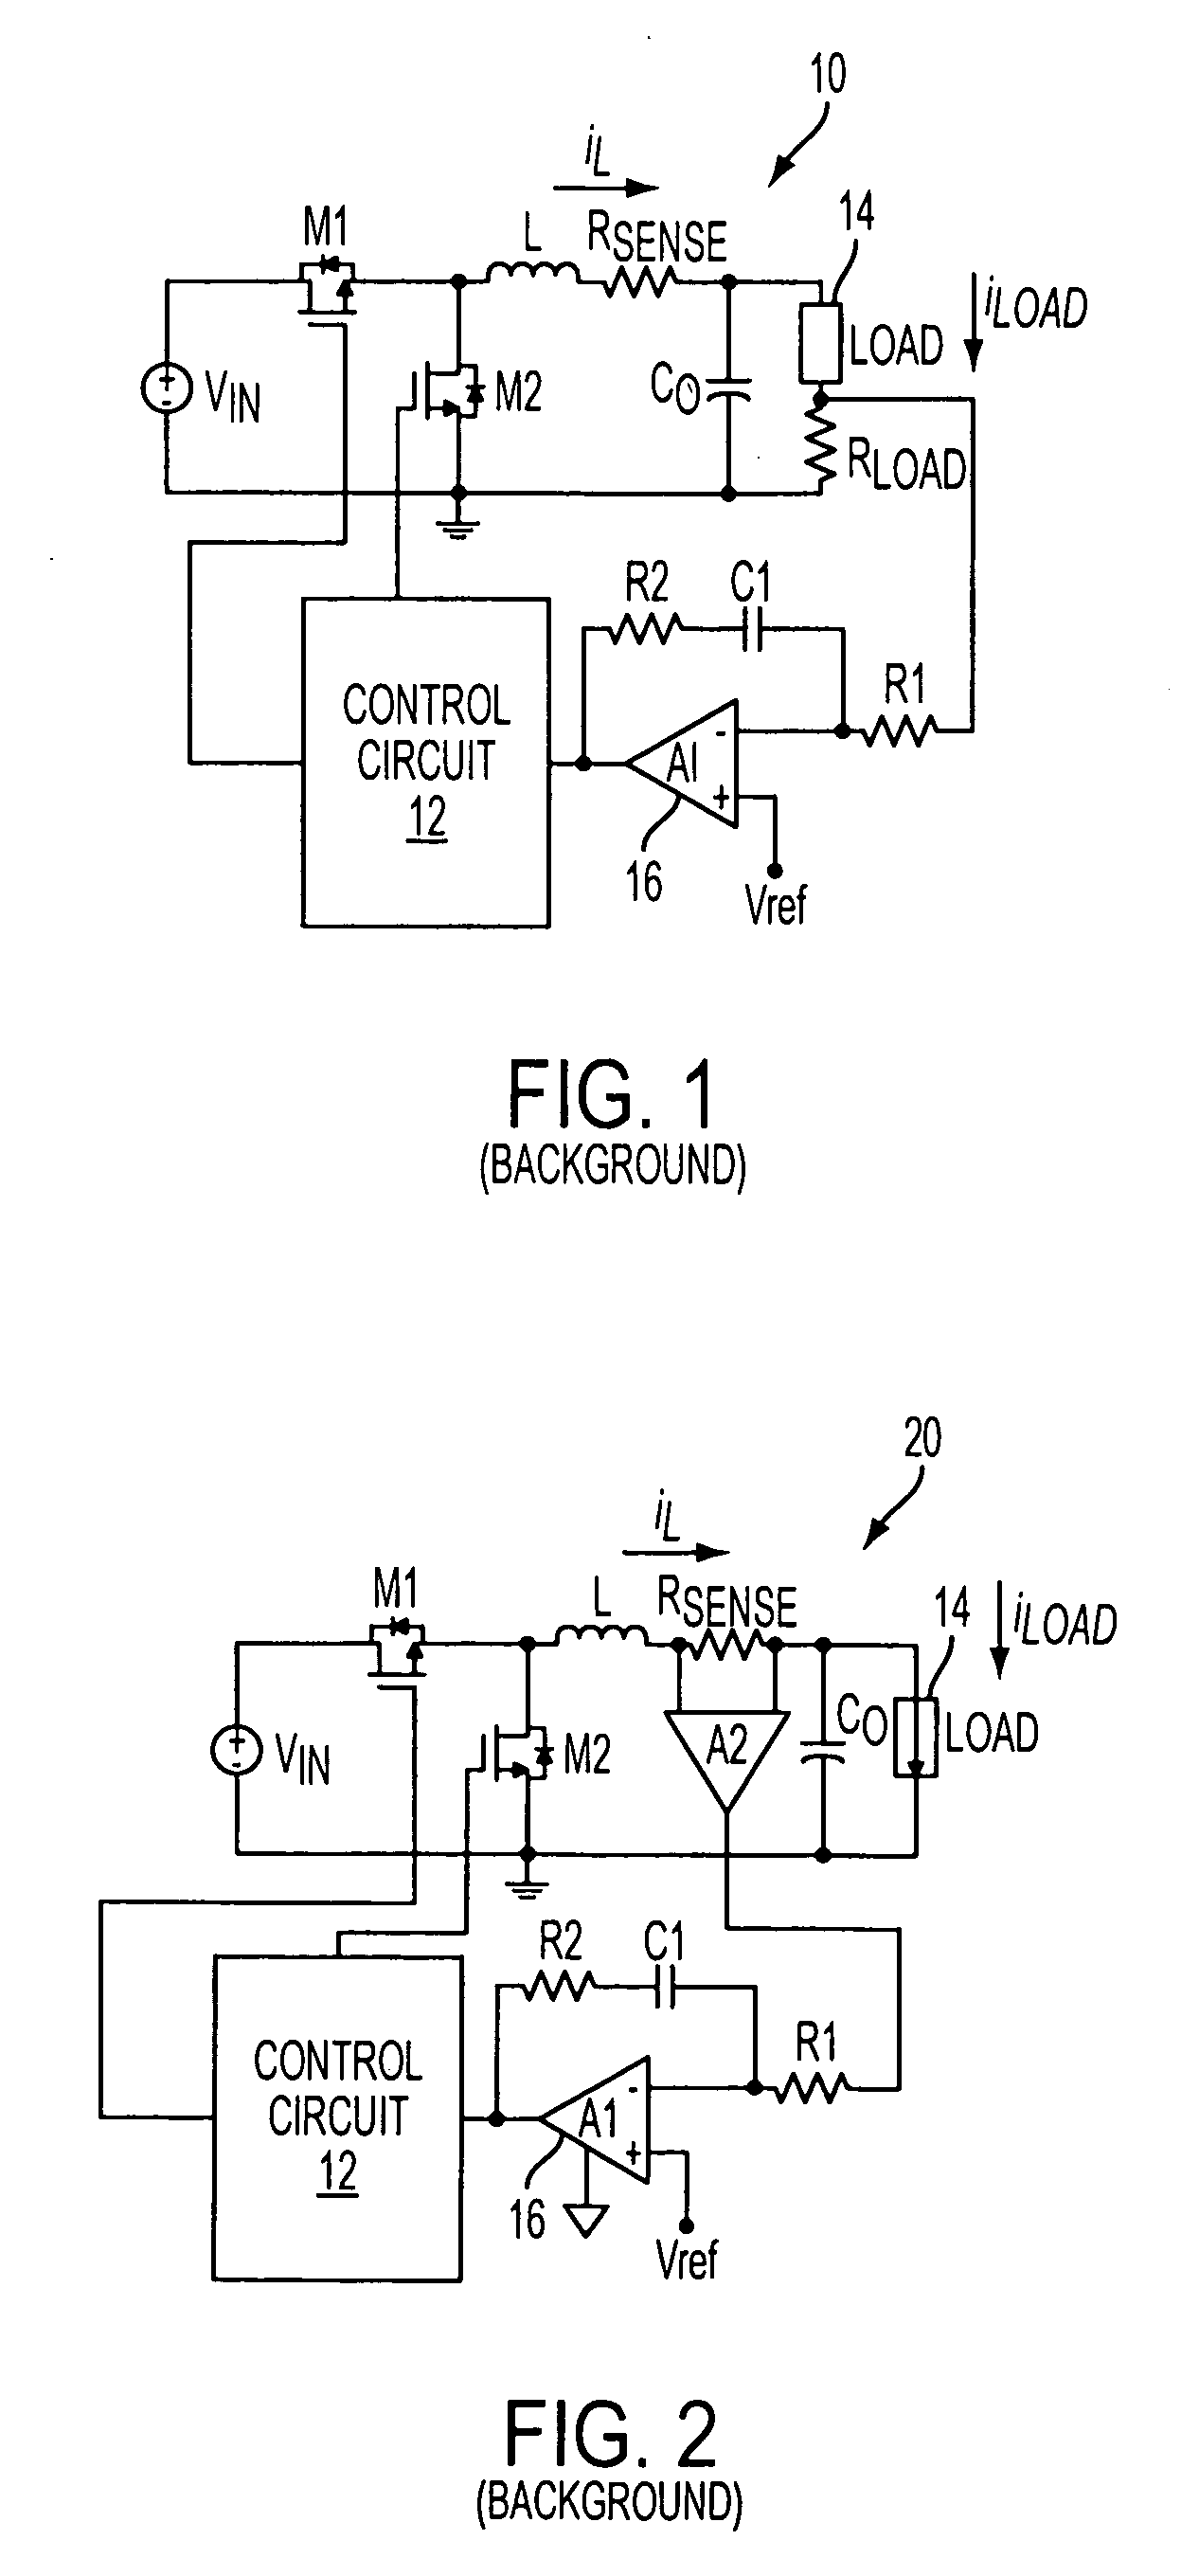 Current source with indirect load current signal extraction